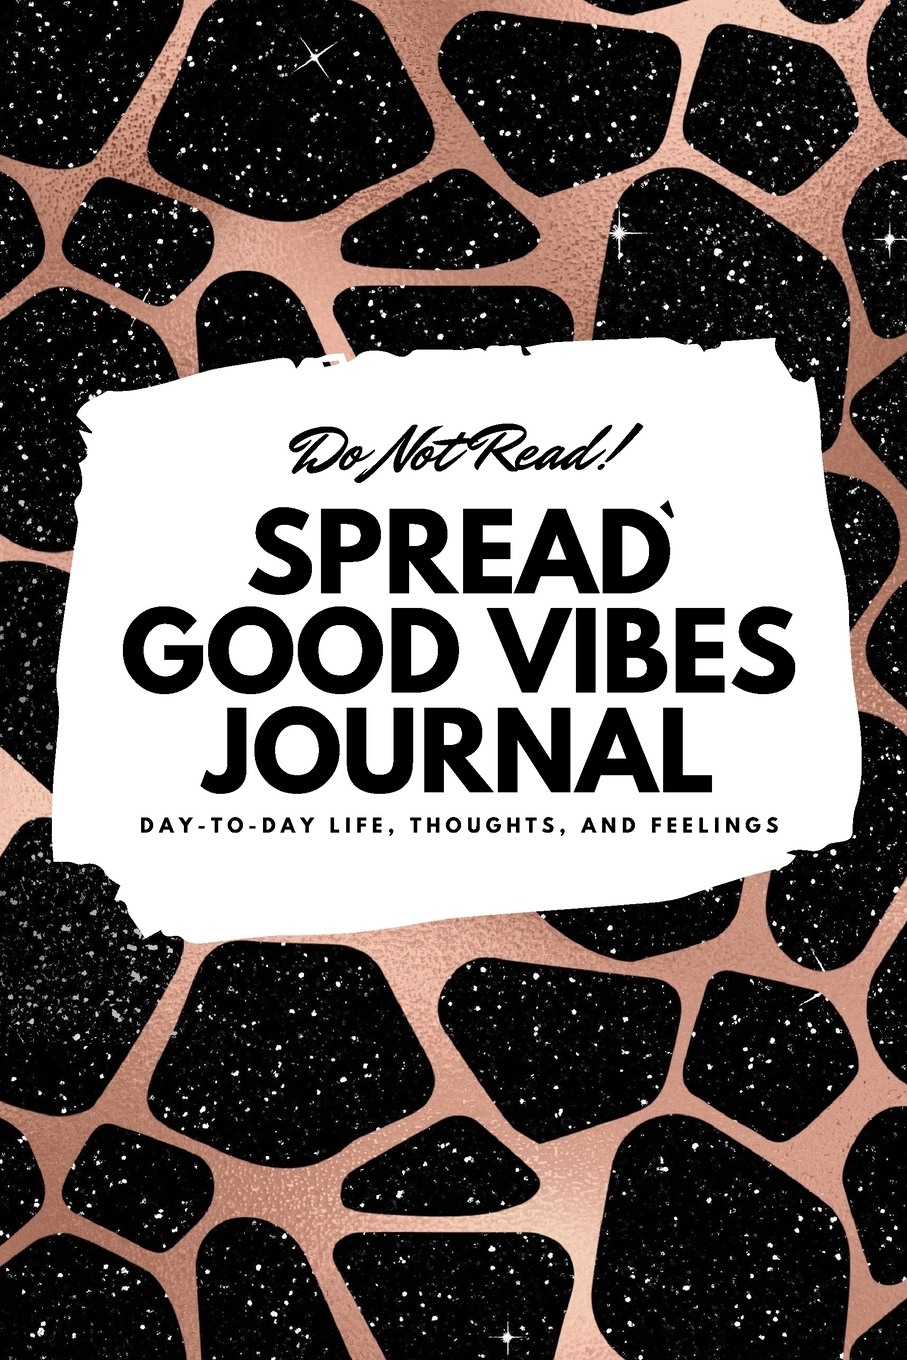 6x9 Blank Journal: Do Not Read! Spread Good Vibes Journal - Small Blank Journal - 6x9 Blank Journal (Softcover Journal / Notebook / Sketchbook / Diary) (Series #41) (Paperback) - image 1 of 1